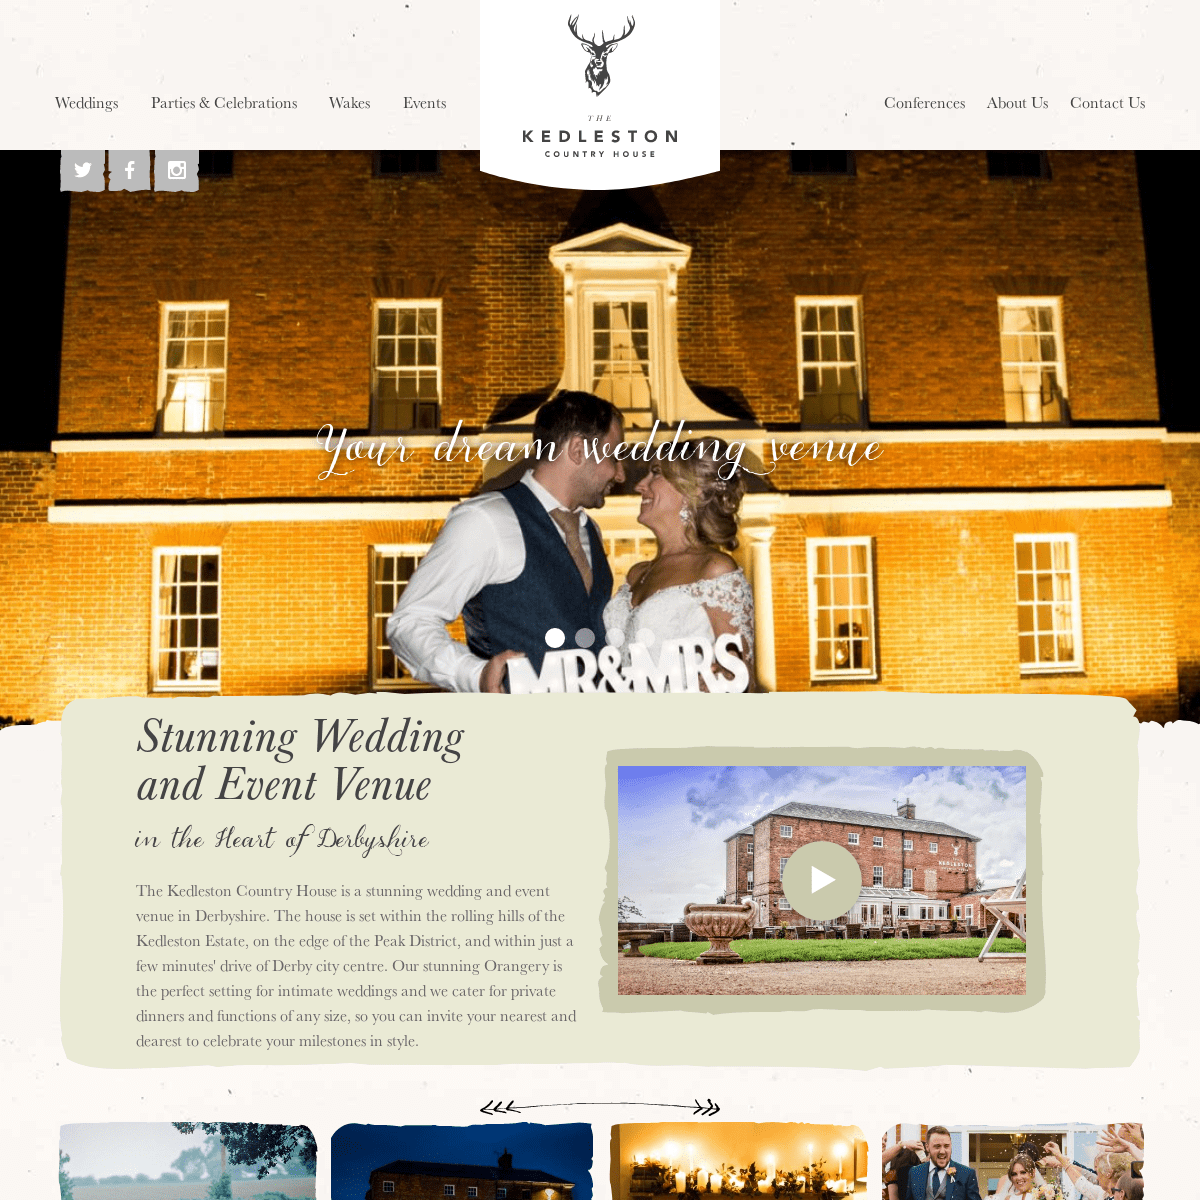 Wedding and Event venue in Derbyshire - The Kedleston Country House